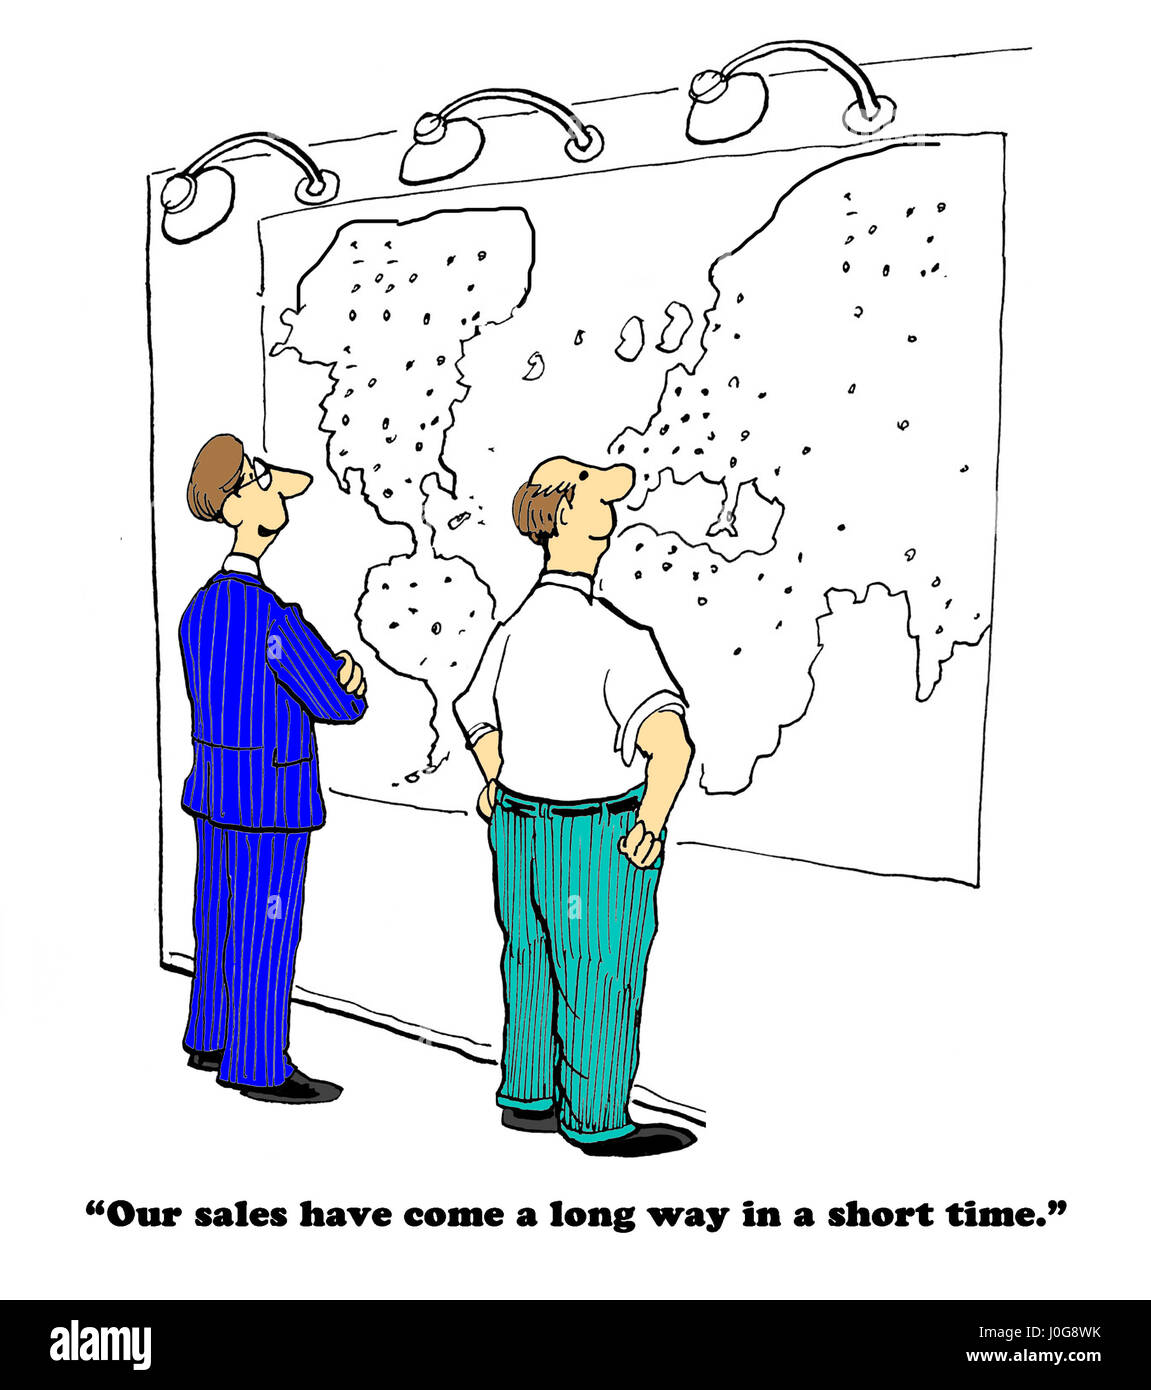 Business cartoon about large international expansion in a short amount of time. Stock Photo